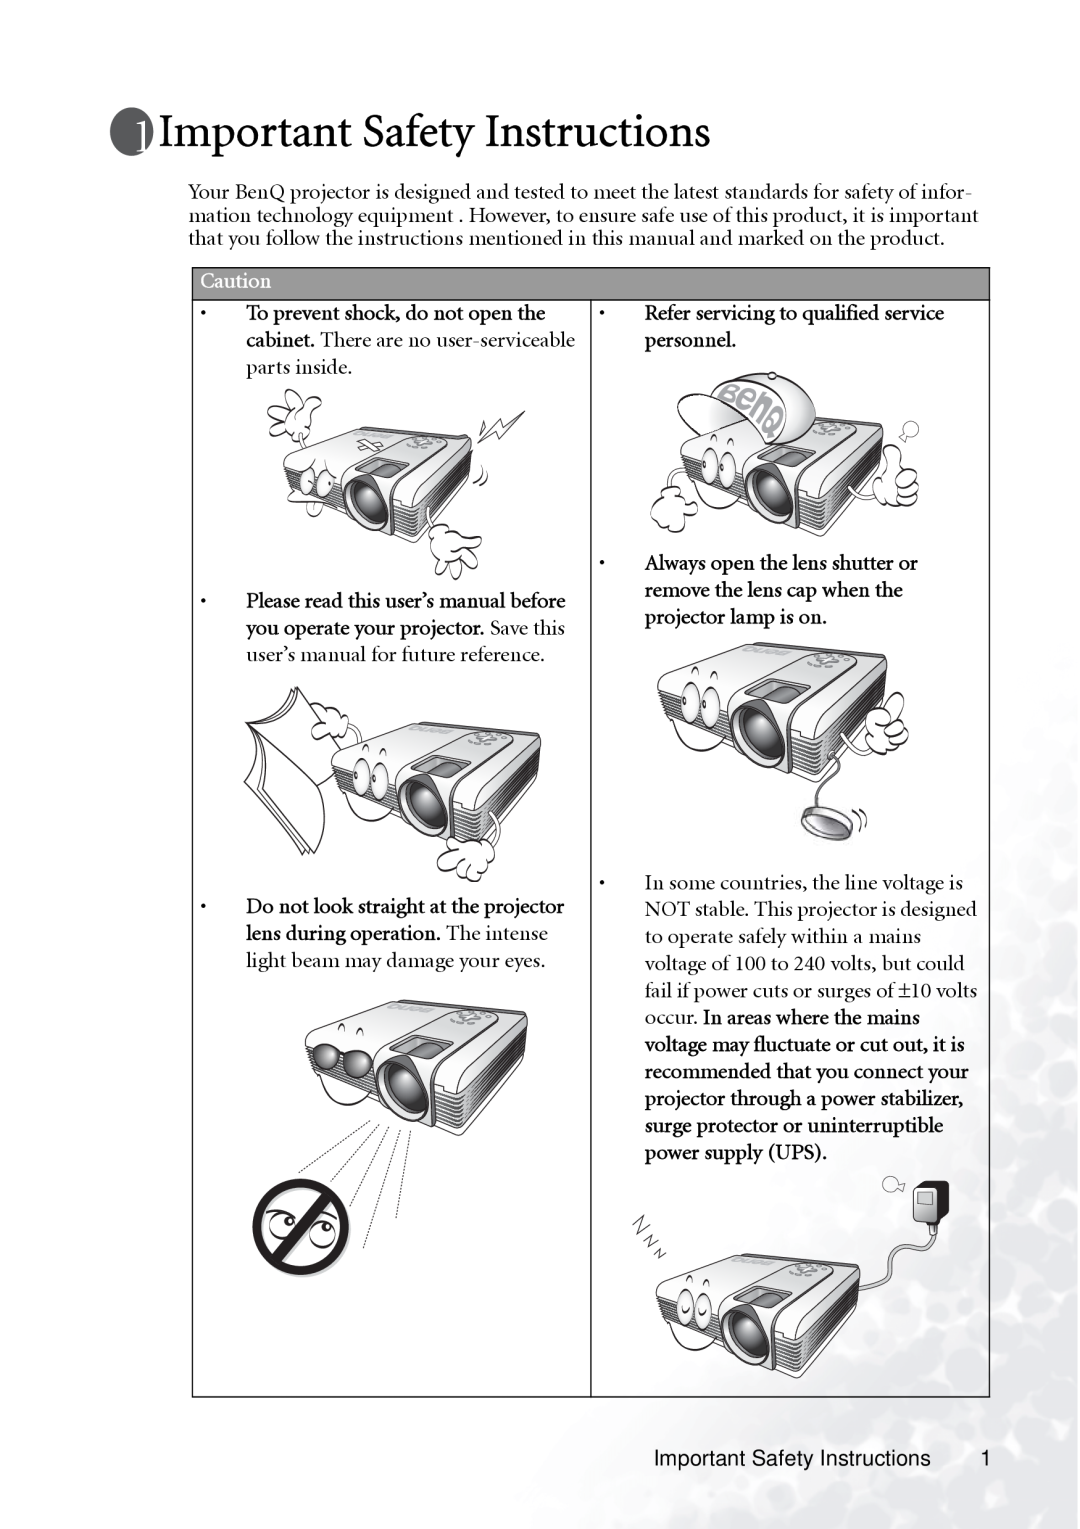 BenQ PB7230 manual Important Safety Instructions, Refer servicing to qualified service personnel 